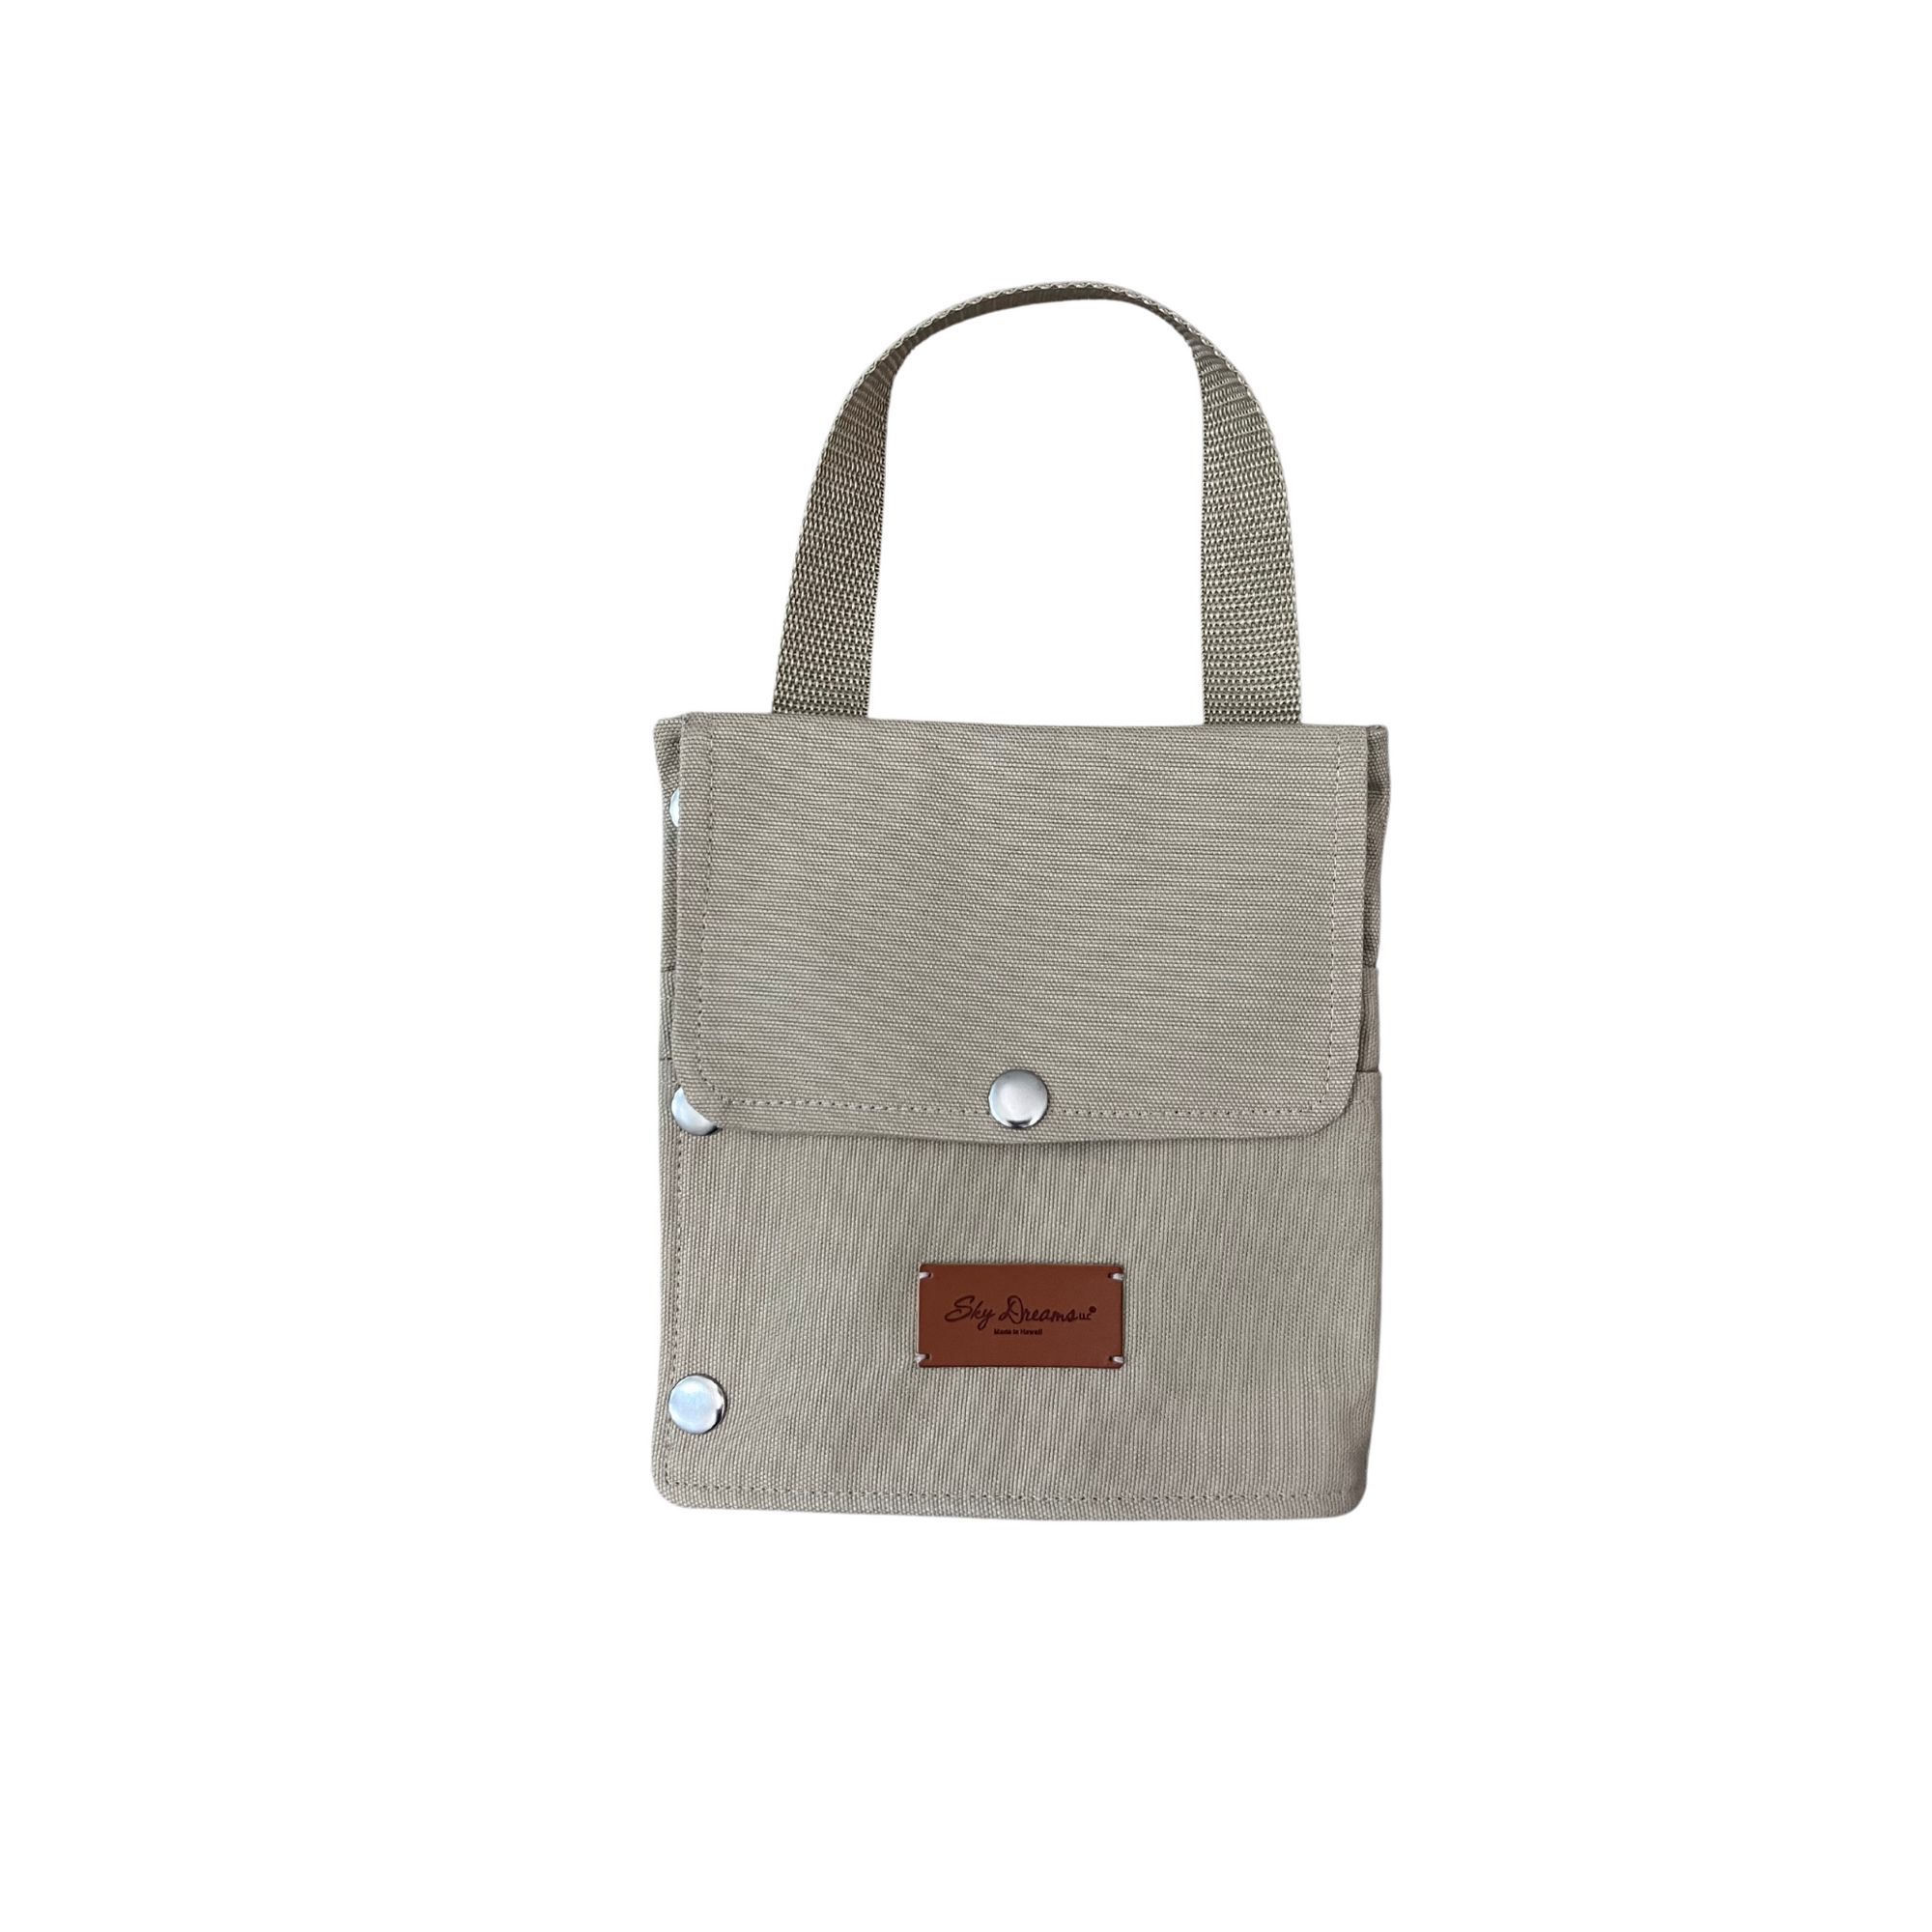 Sky Luggage Cup holder bag-Duck Canvas Beige